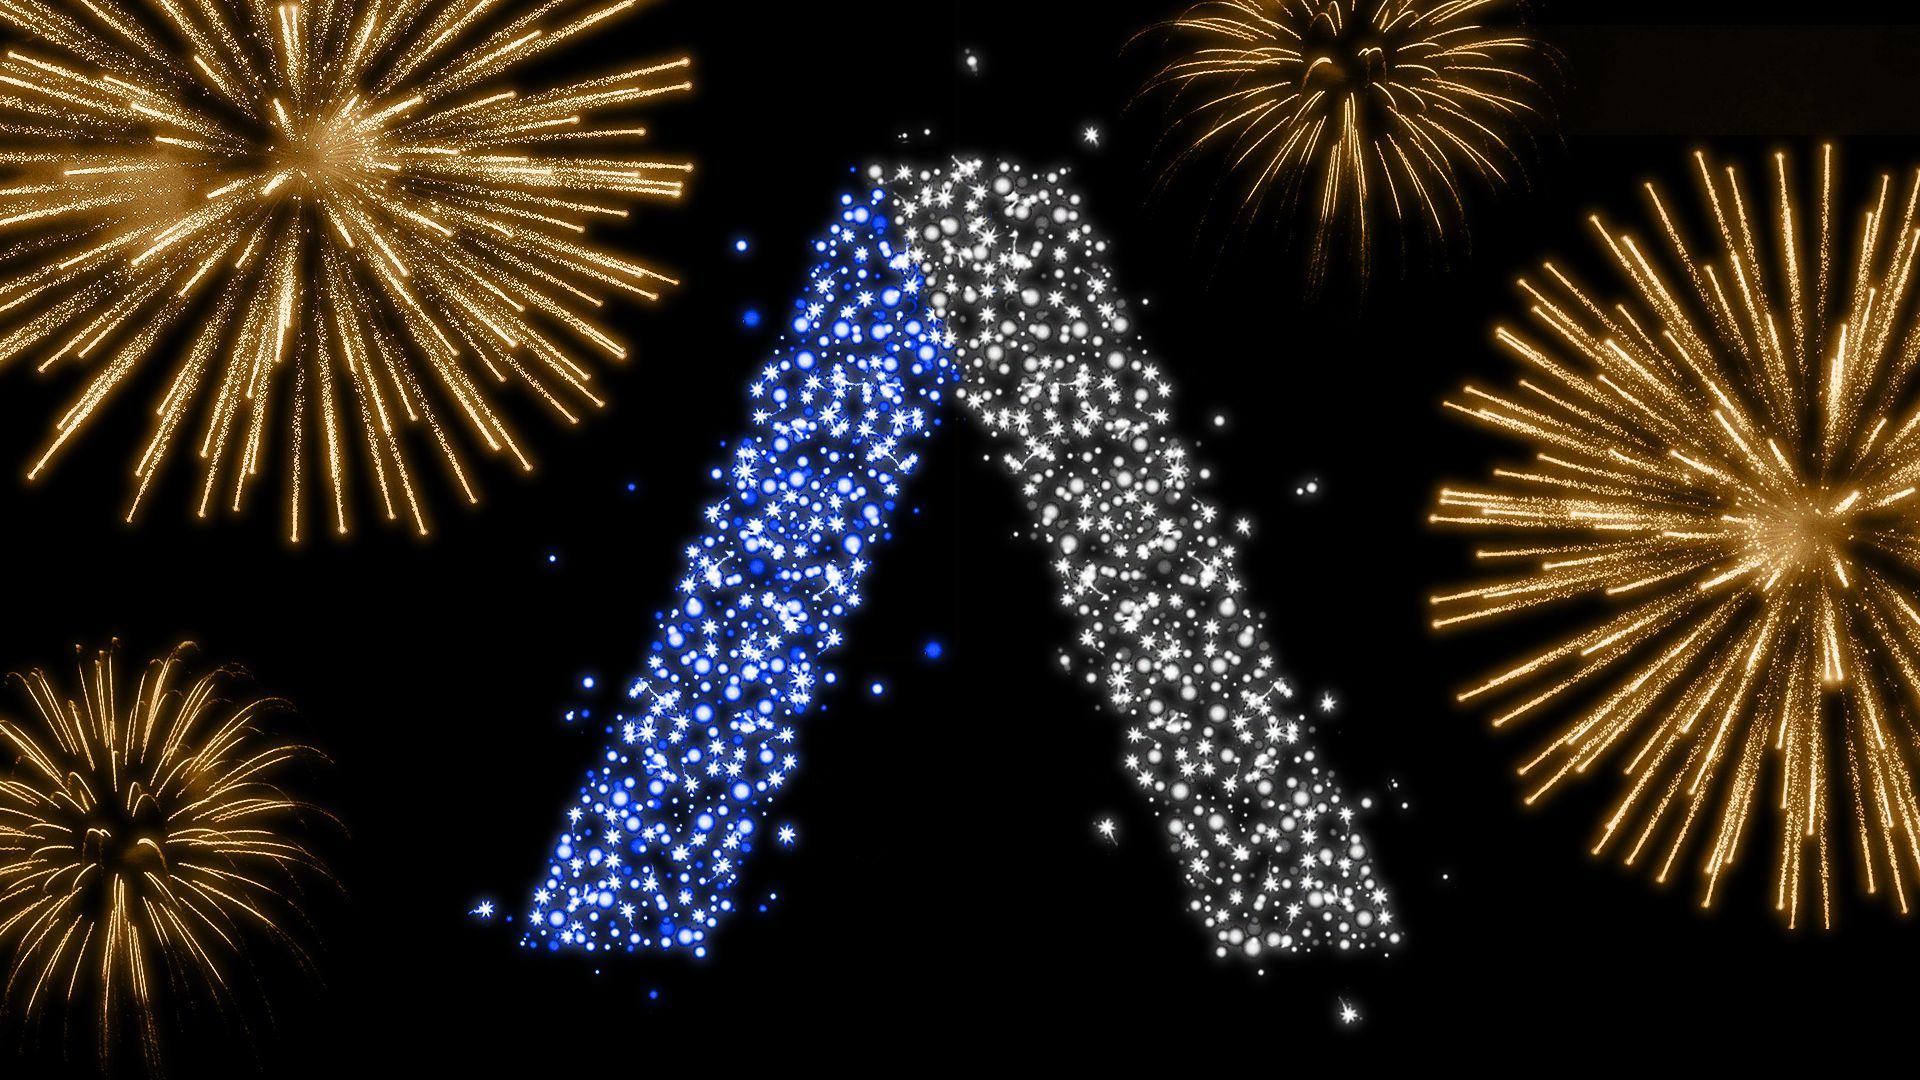 Illustration of the Axios "A" written in fireworks.